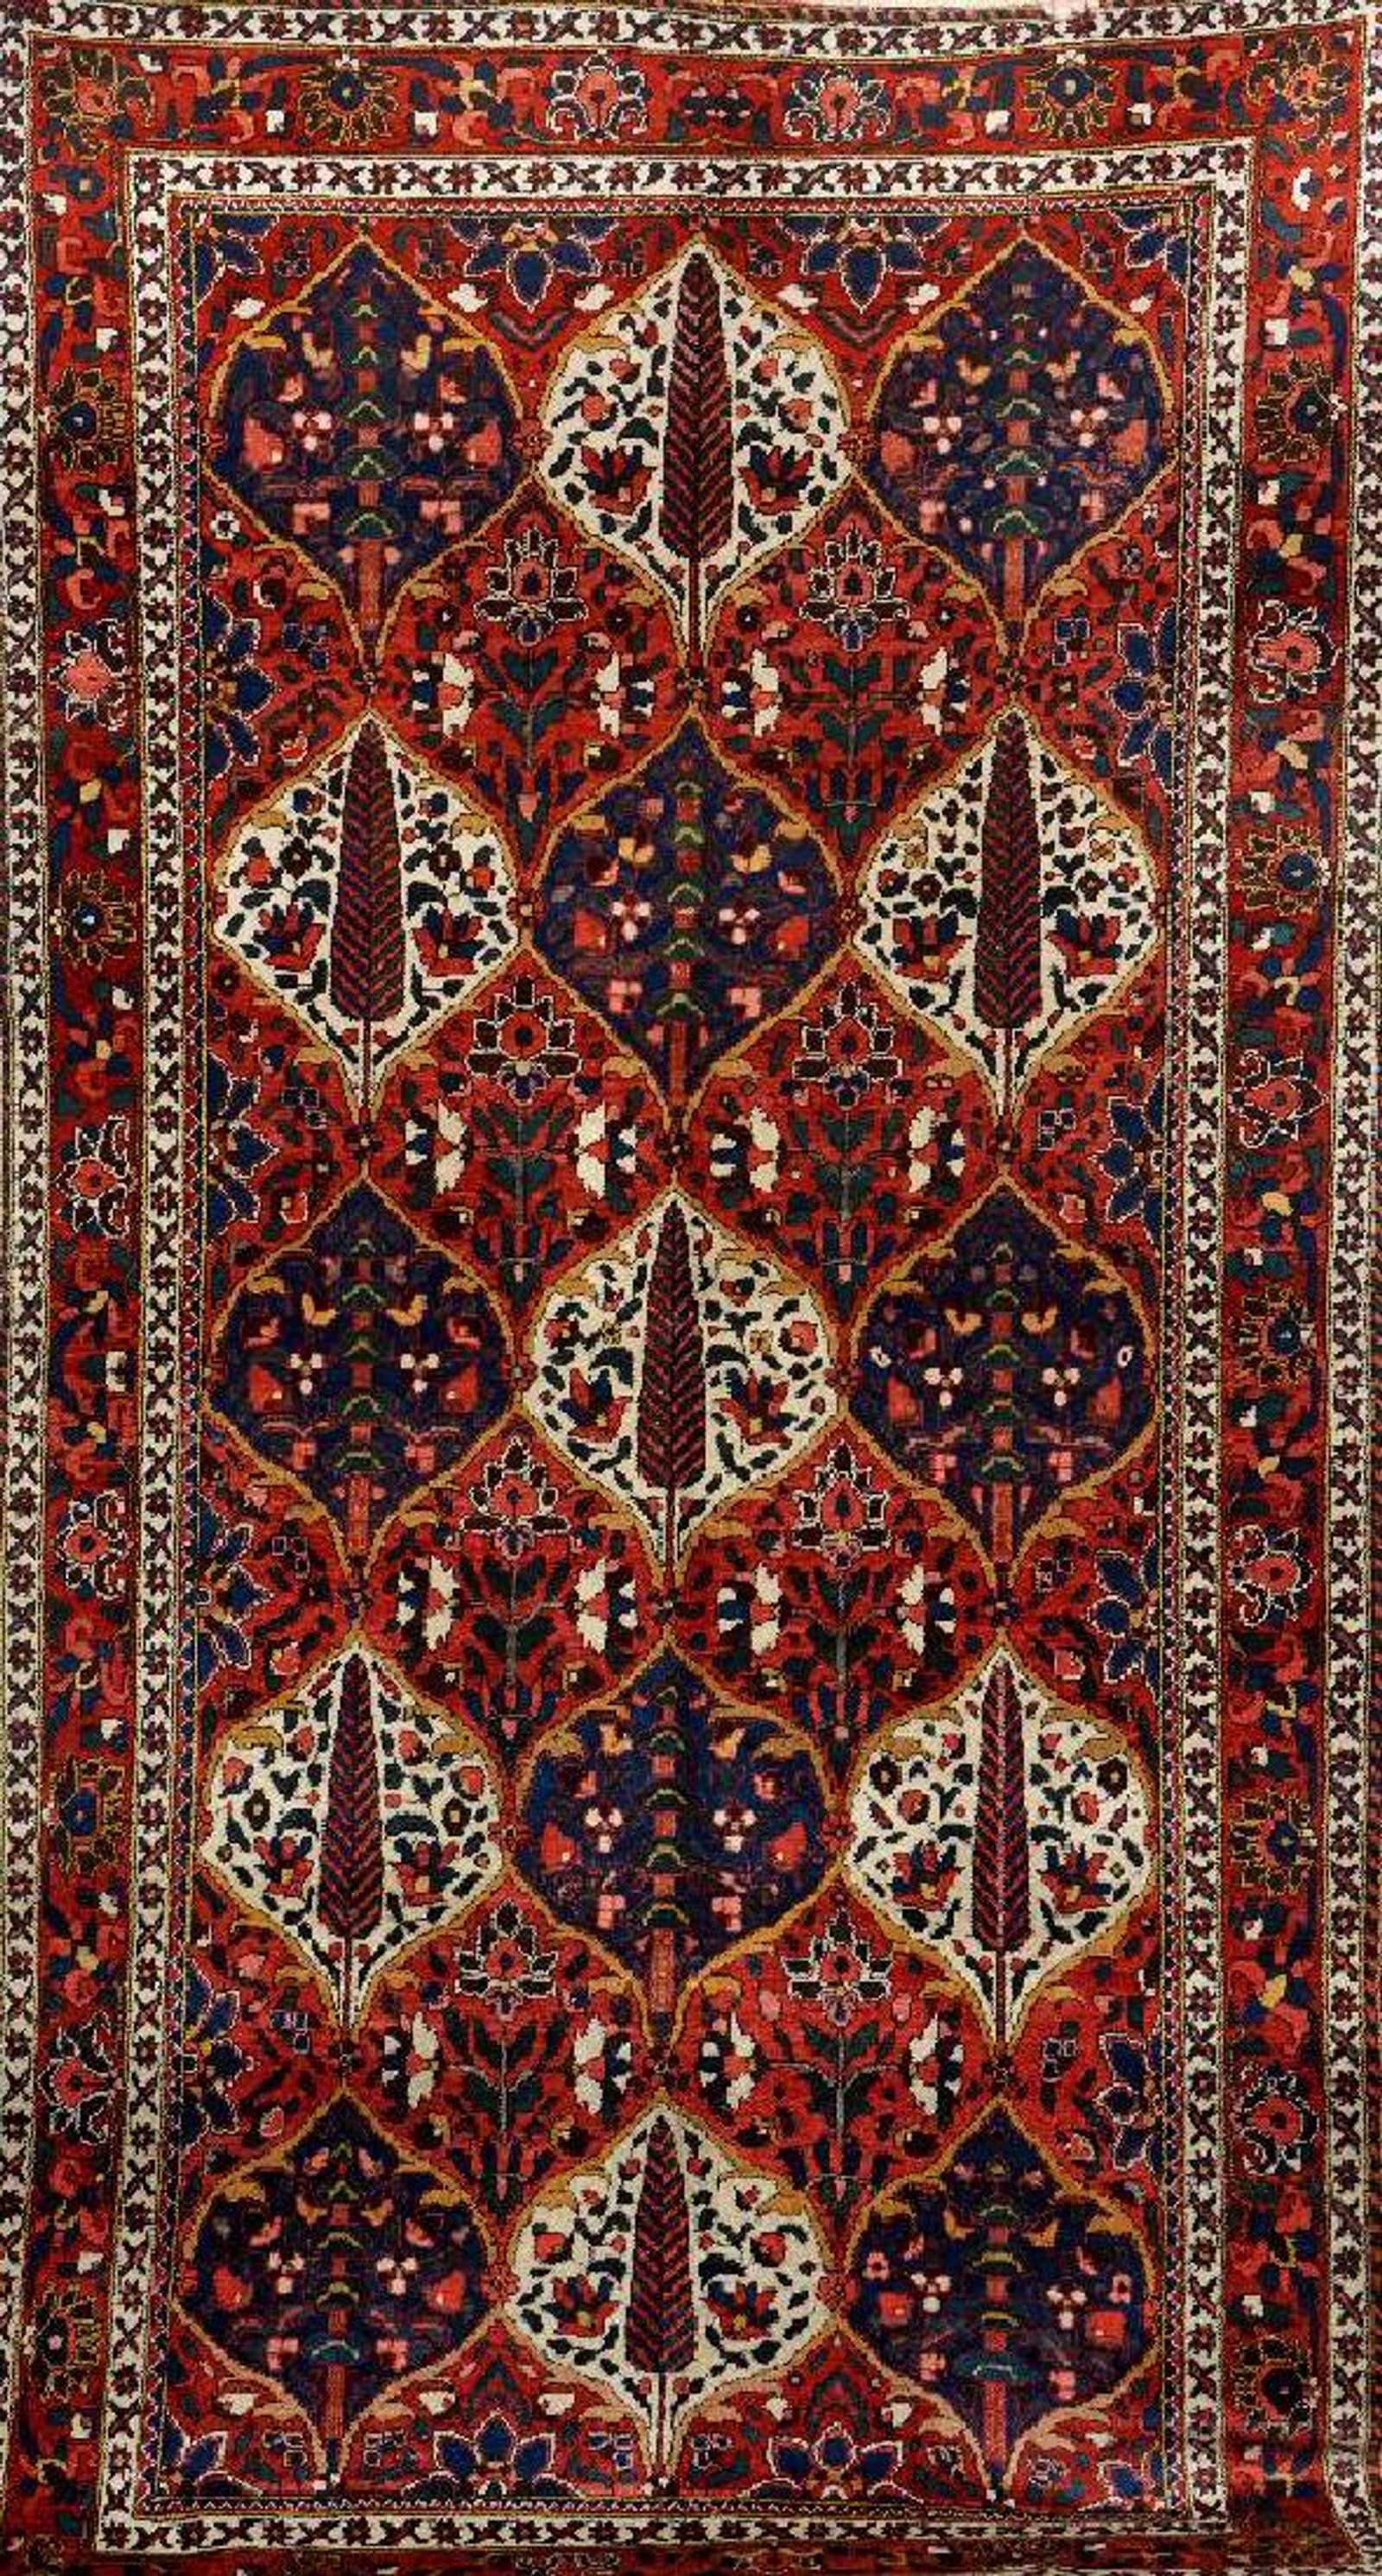 Bakhtiar Rug, 2018. Henry's Auktionshaus AG in Germany. Rugs, Rugs on carpet, Tribal carpets